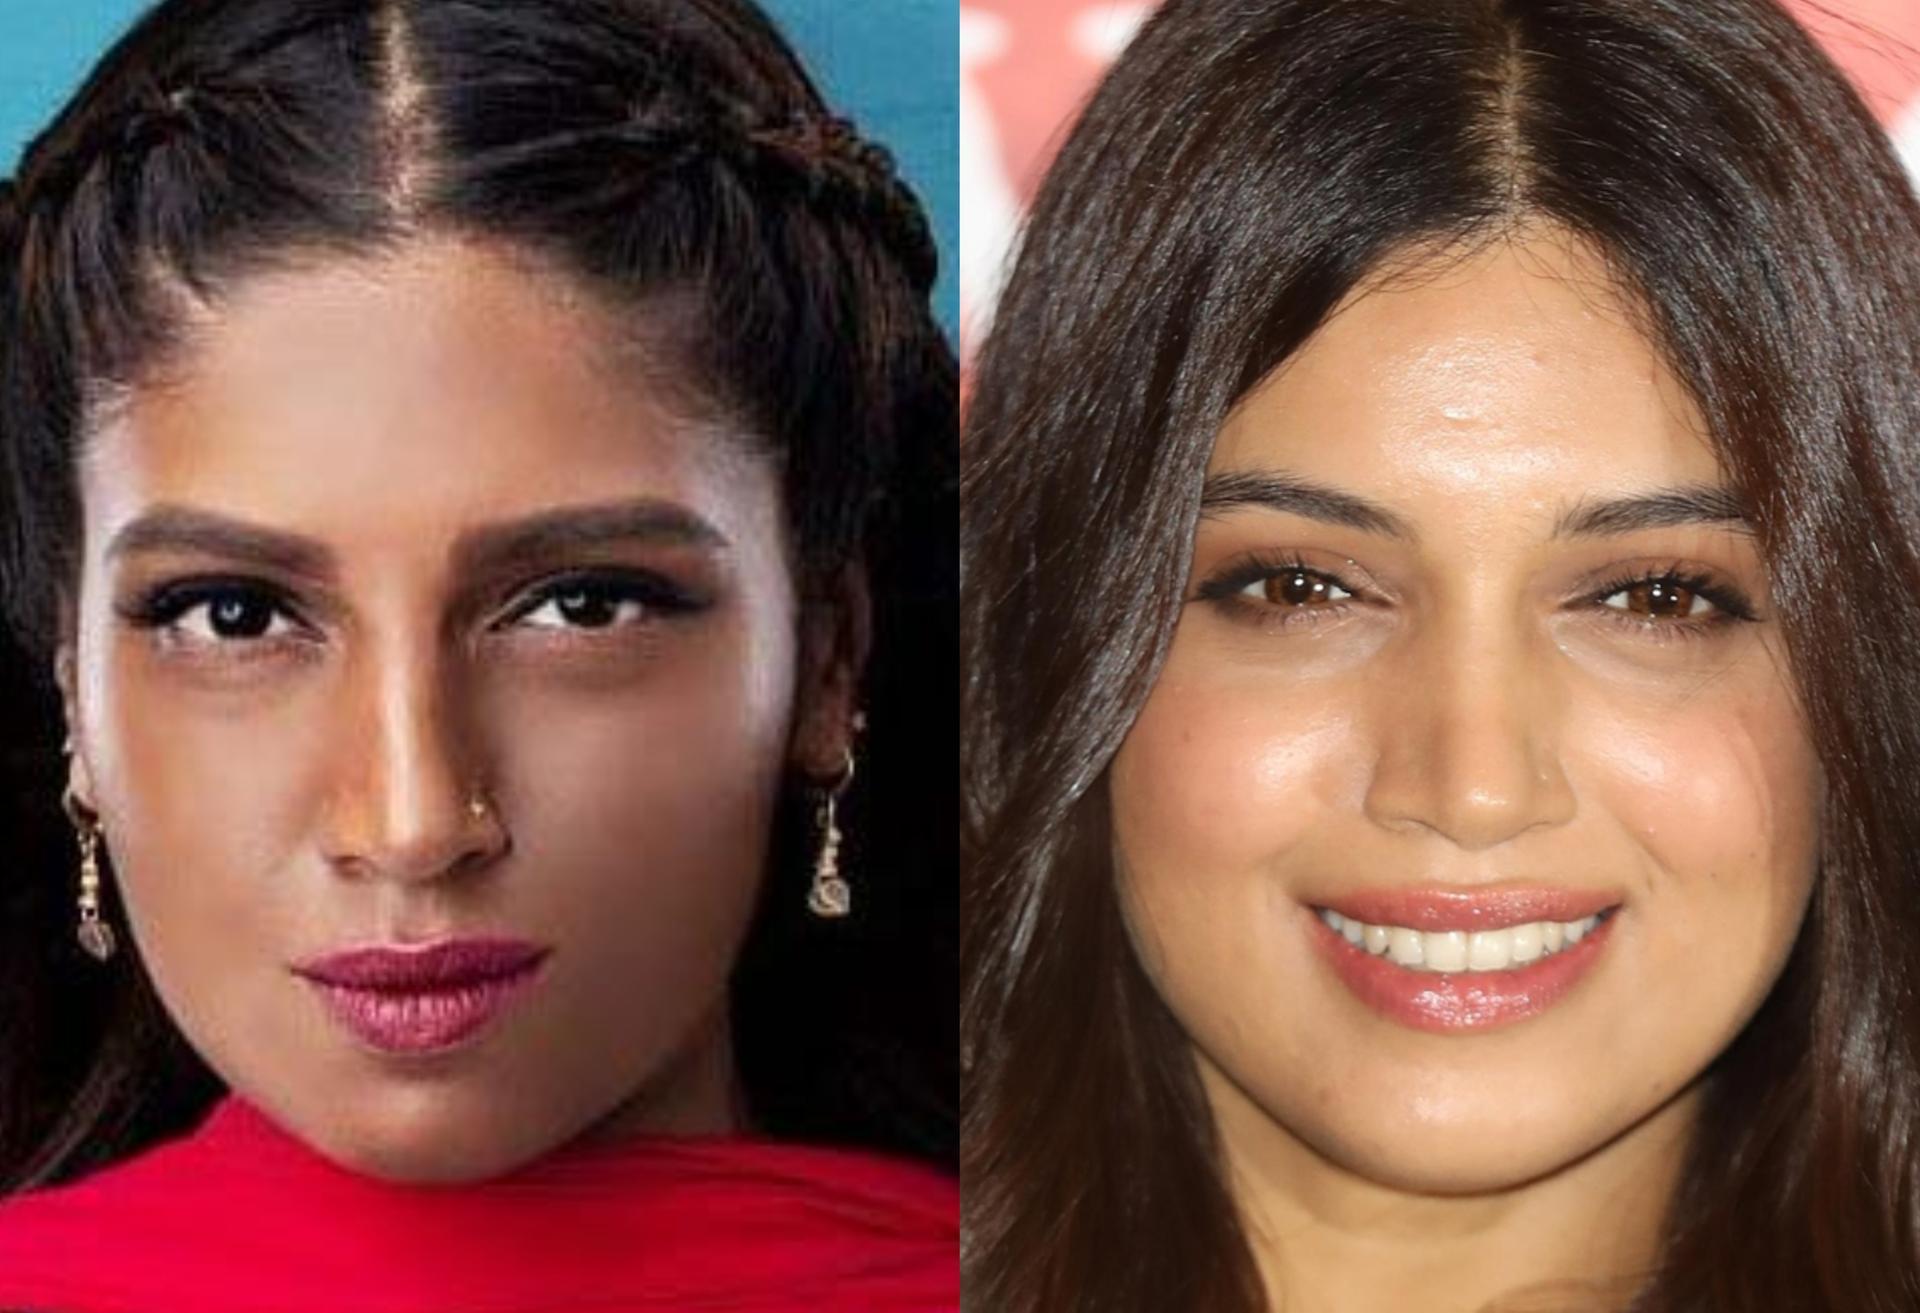 Bollywood Celebs Who Faced Criticism For Their Dark Skin Tone